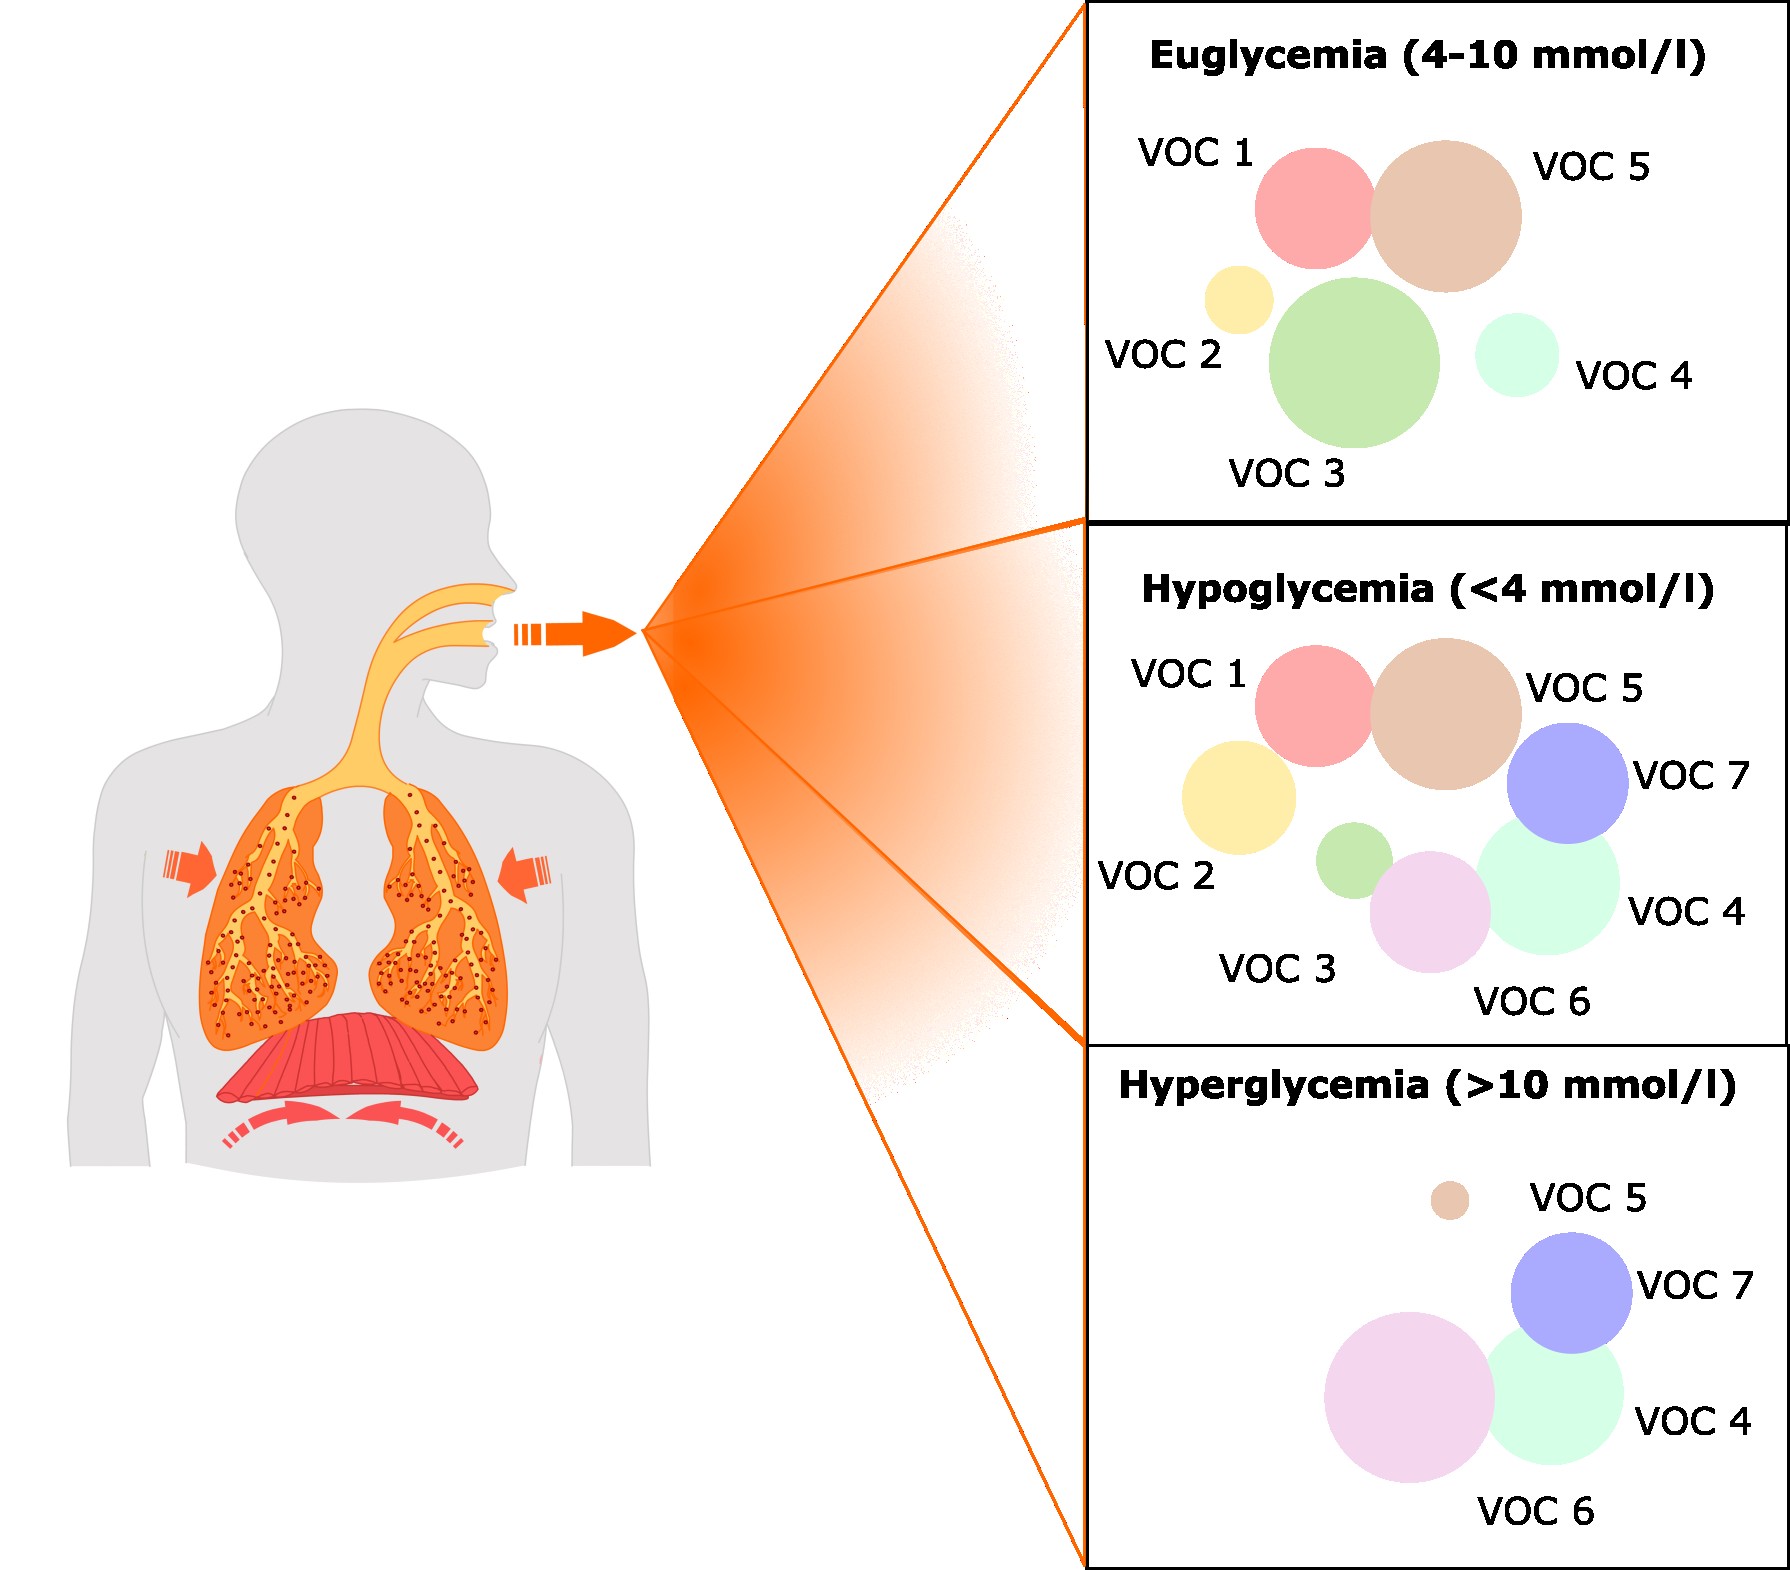 image from Volatile organic compounds in individuals with diabetes